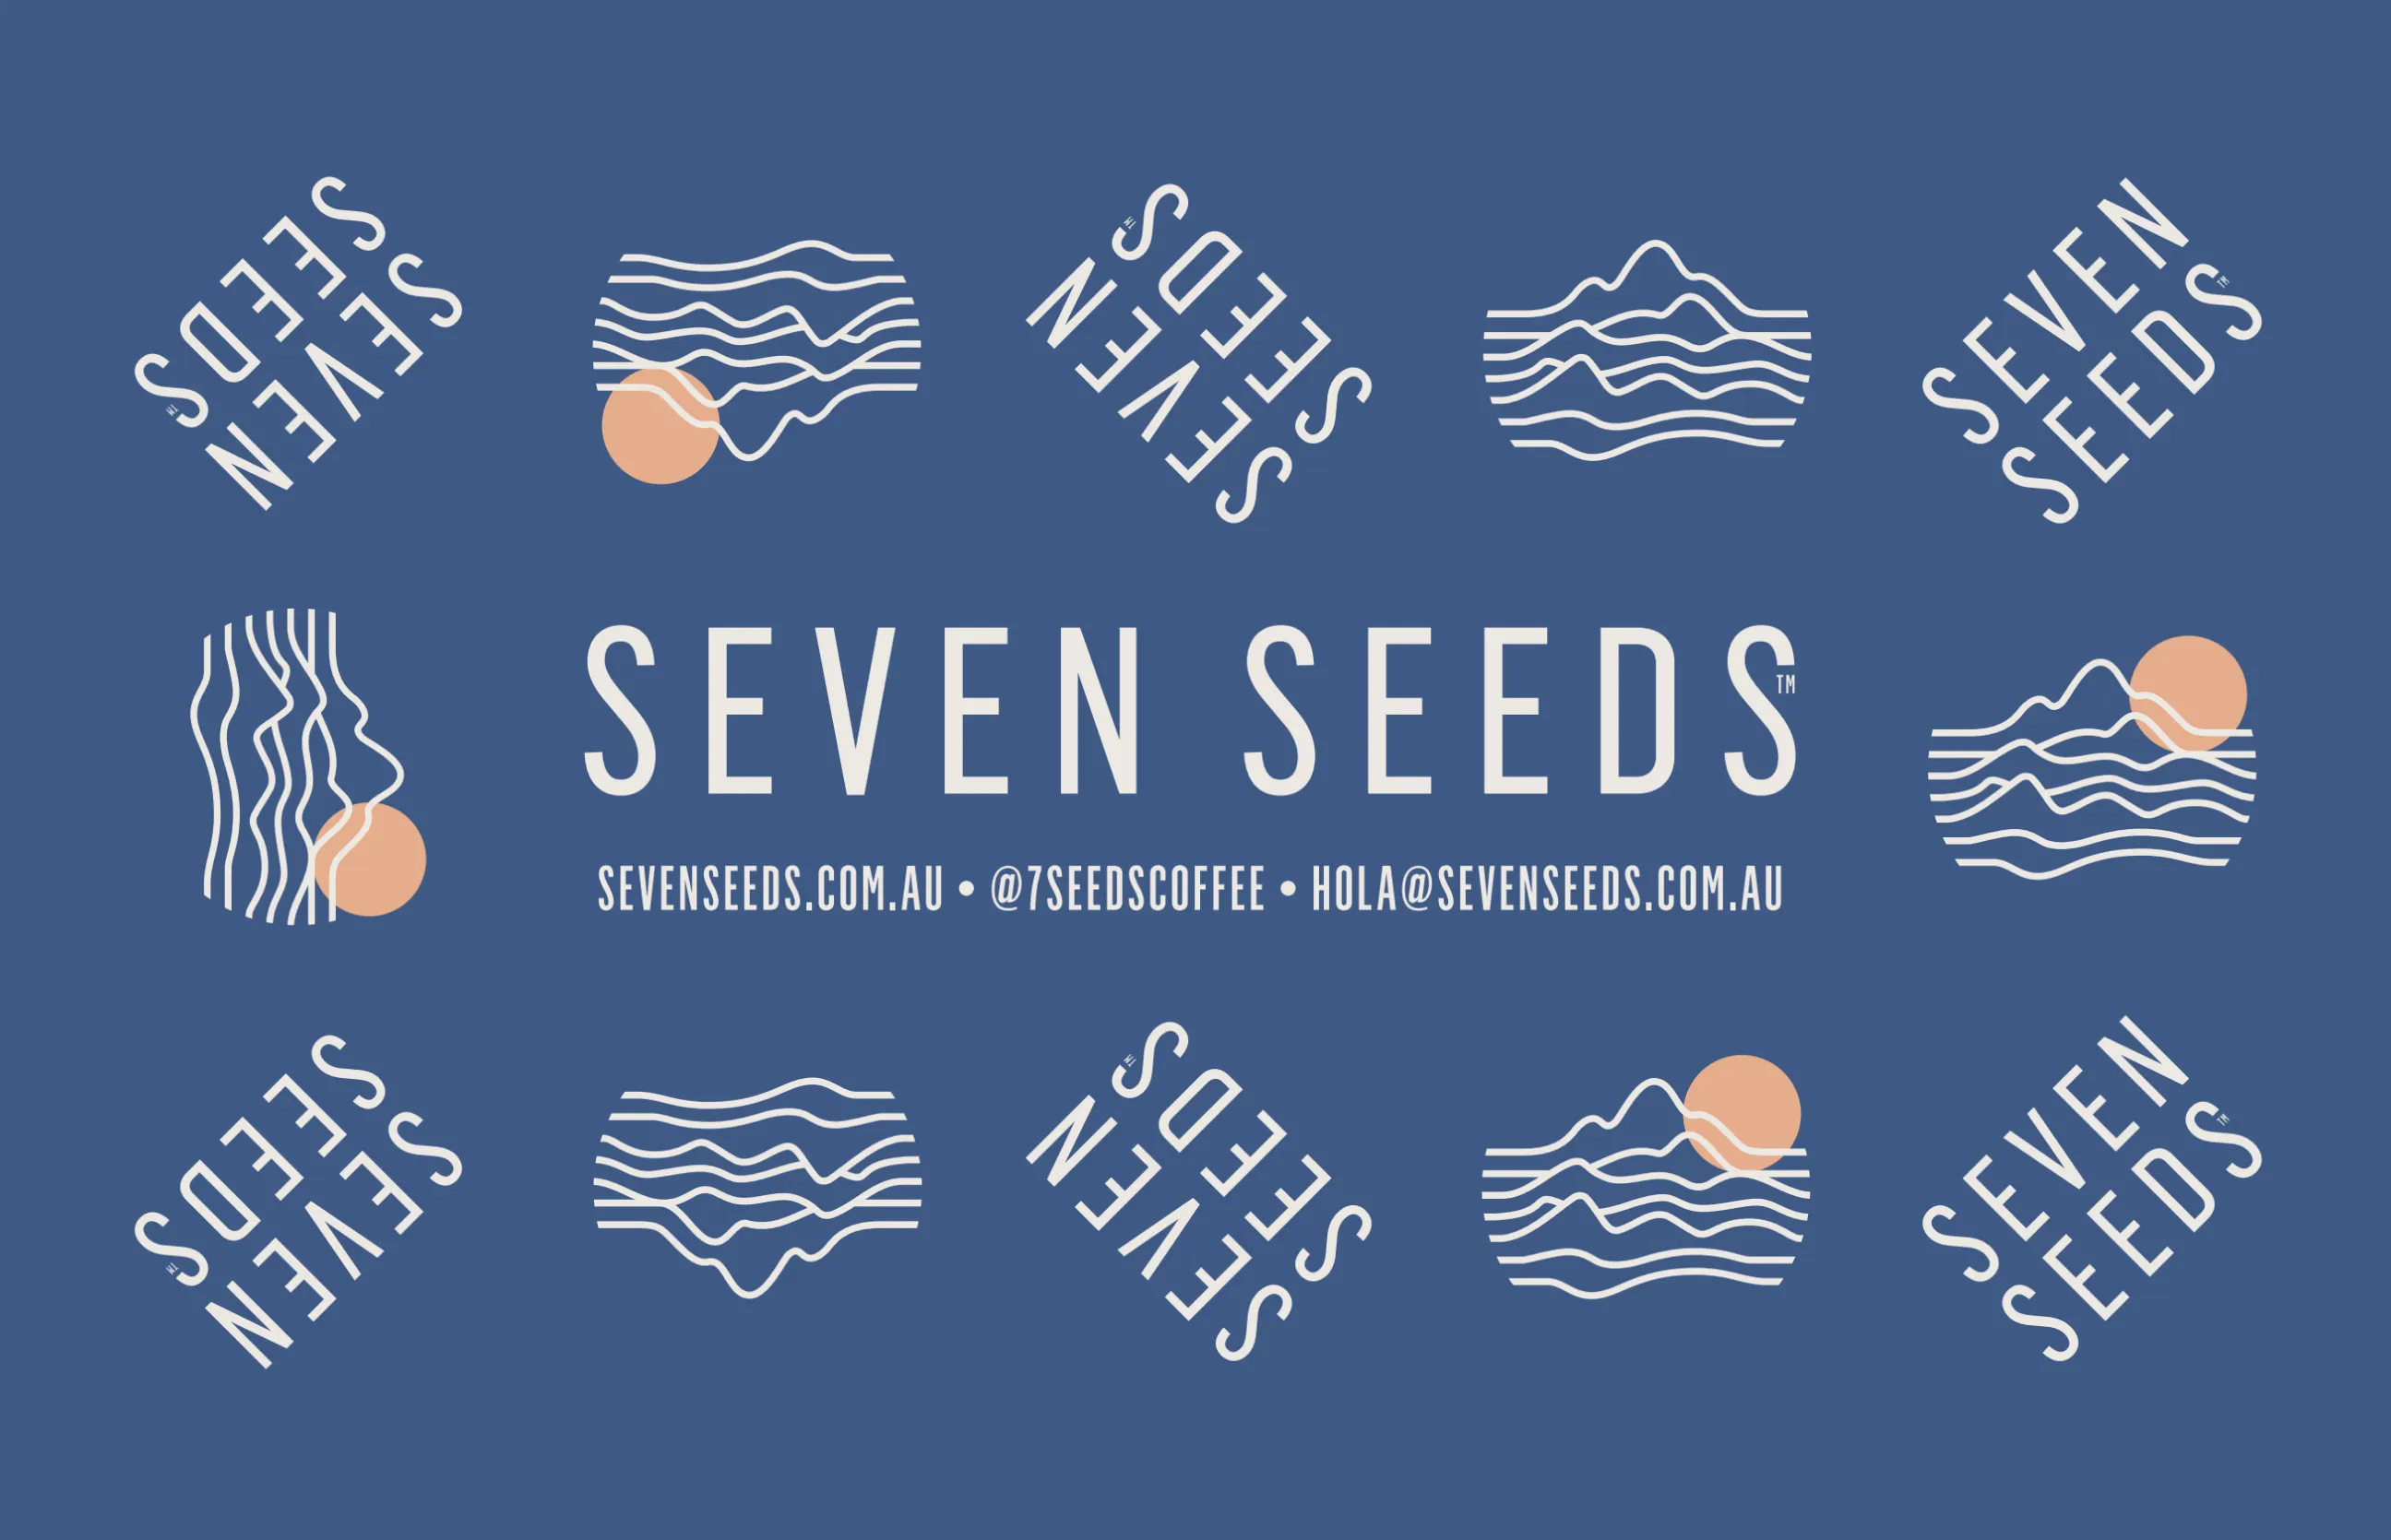 Physical Gift Cards at Seven Seeds